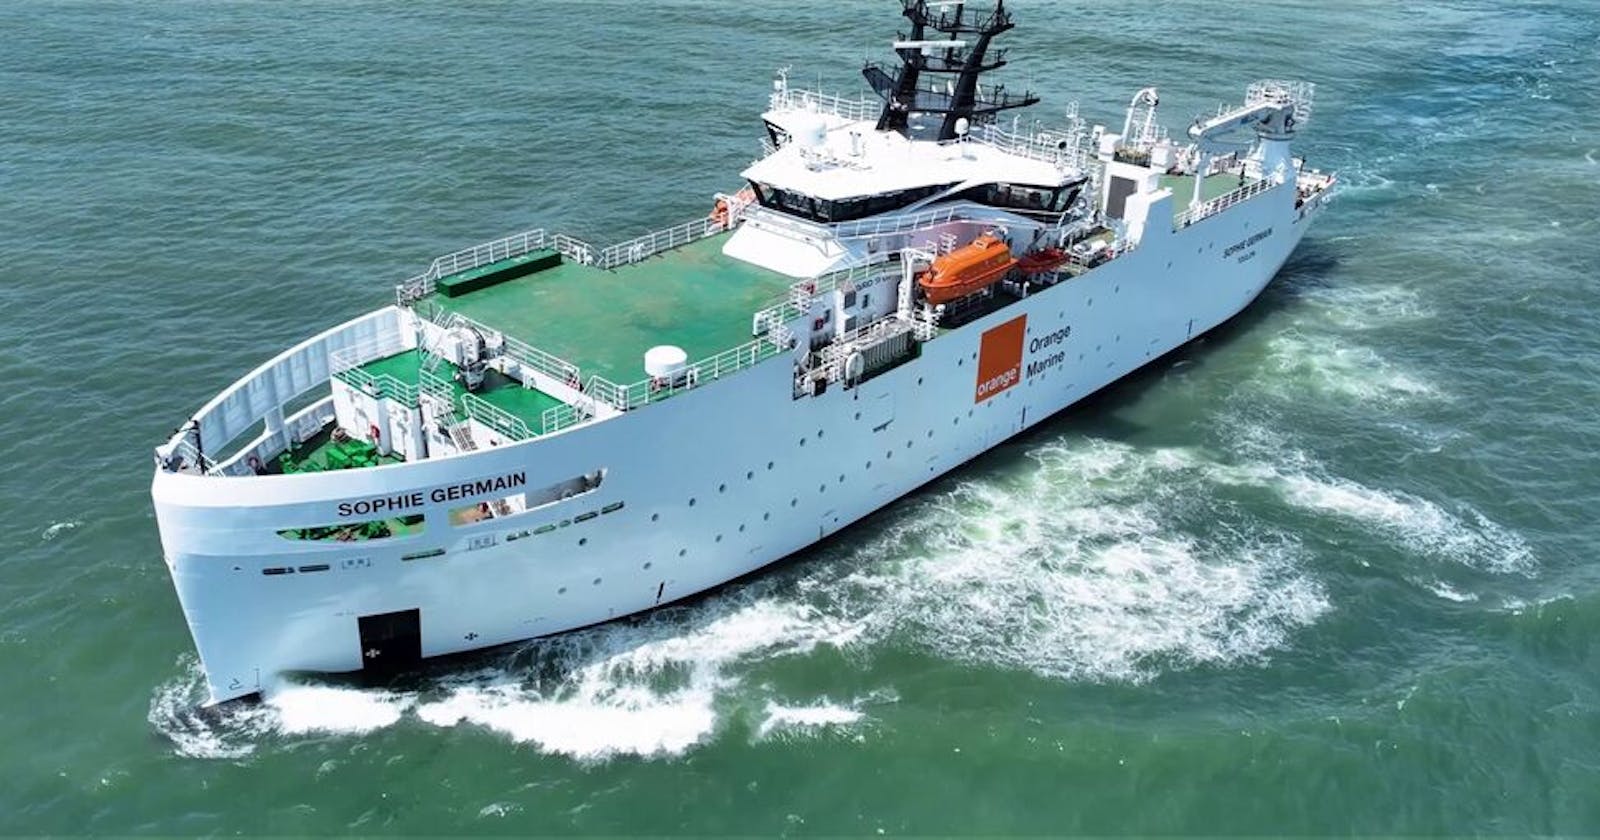 French telecom giant Orange SA has unveiled its latest vessel to help maintain global internet connectivity.